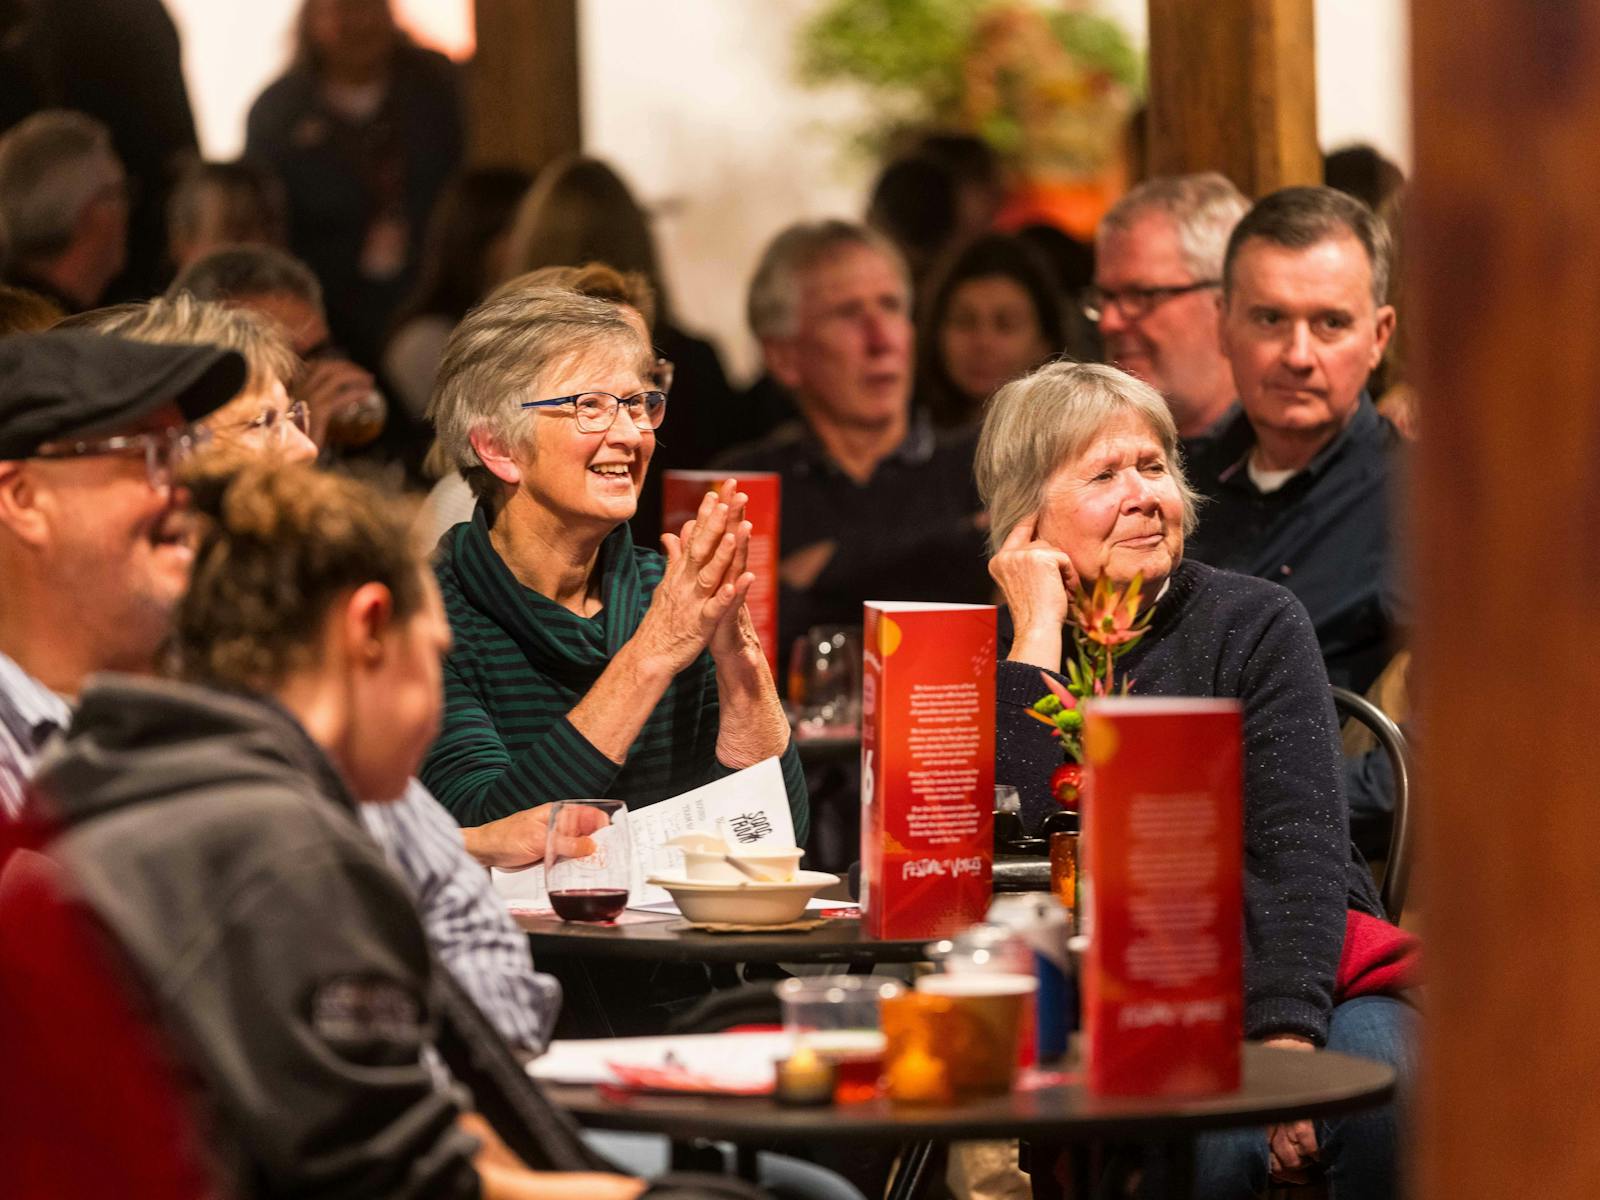 A colour photograph of people sitting at tables, smiling and laughing at a trivia night